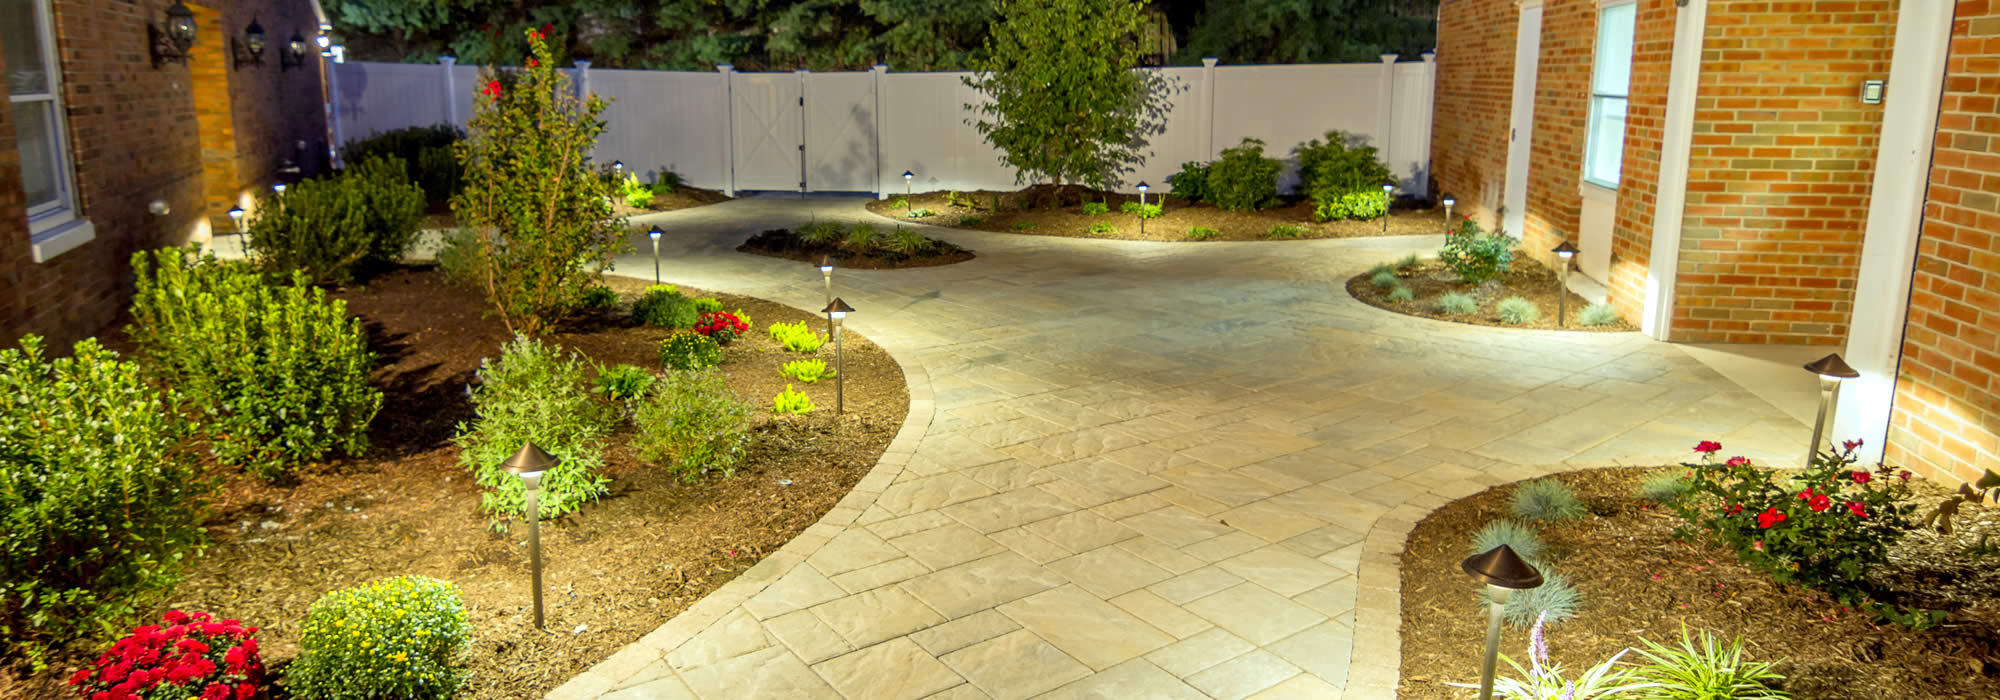 Landscaping Services in Windsor